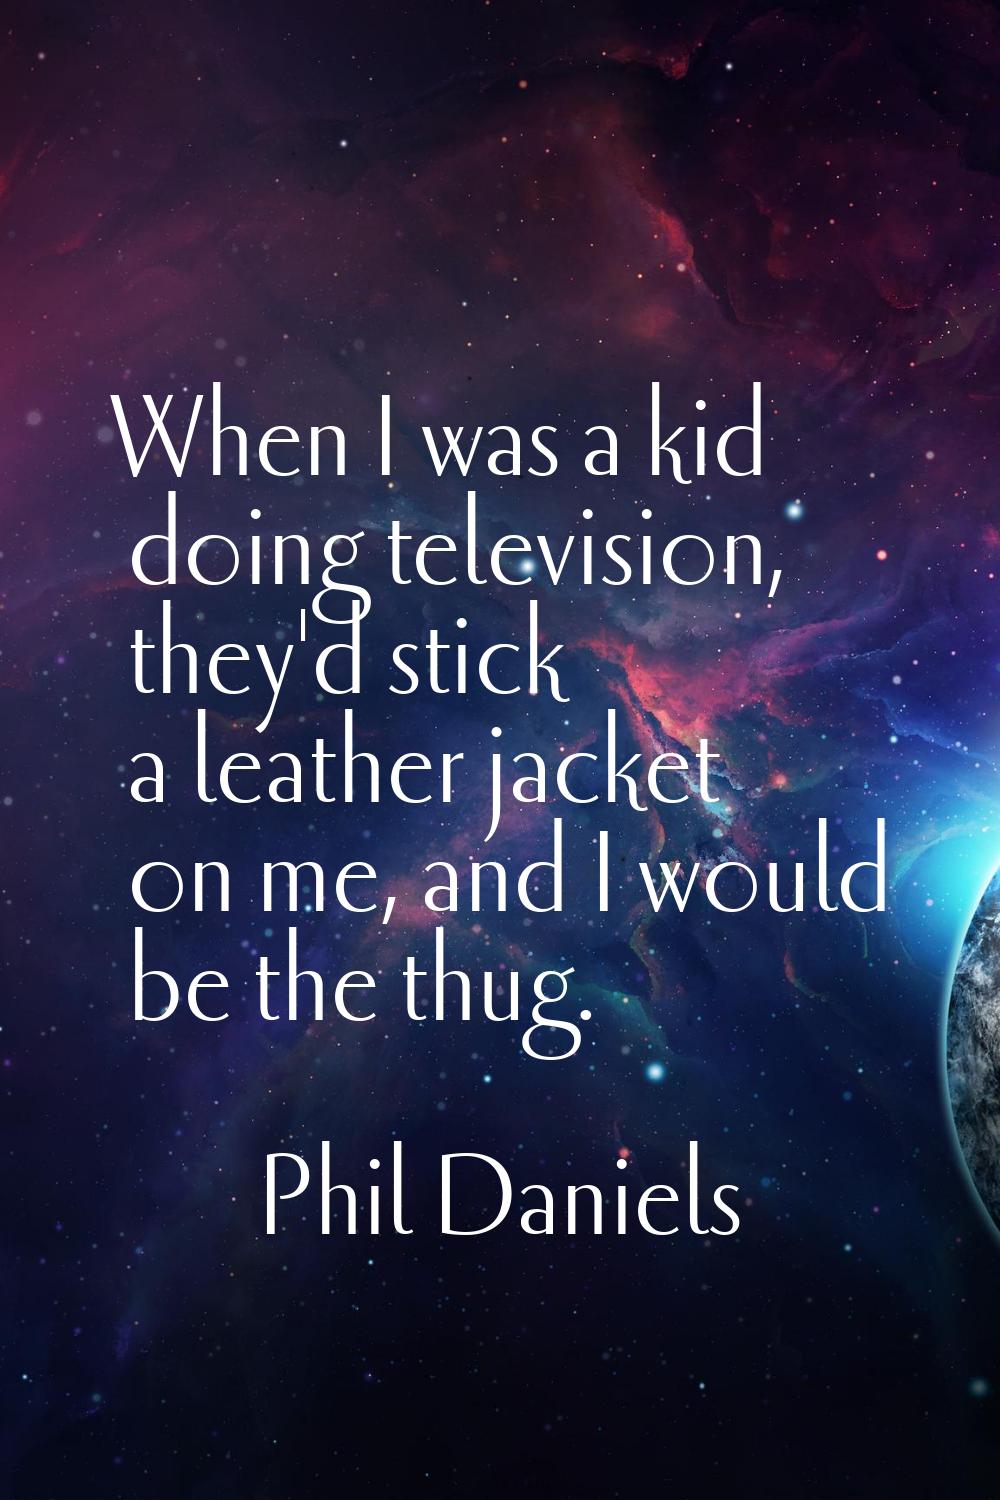 When I was a kid doing television, they'd stick a leather jacket on me, and I would be the thug.